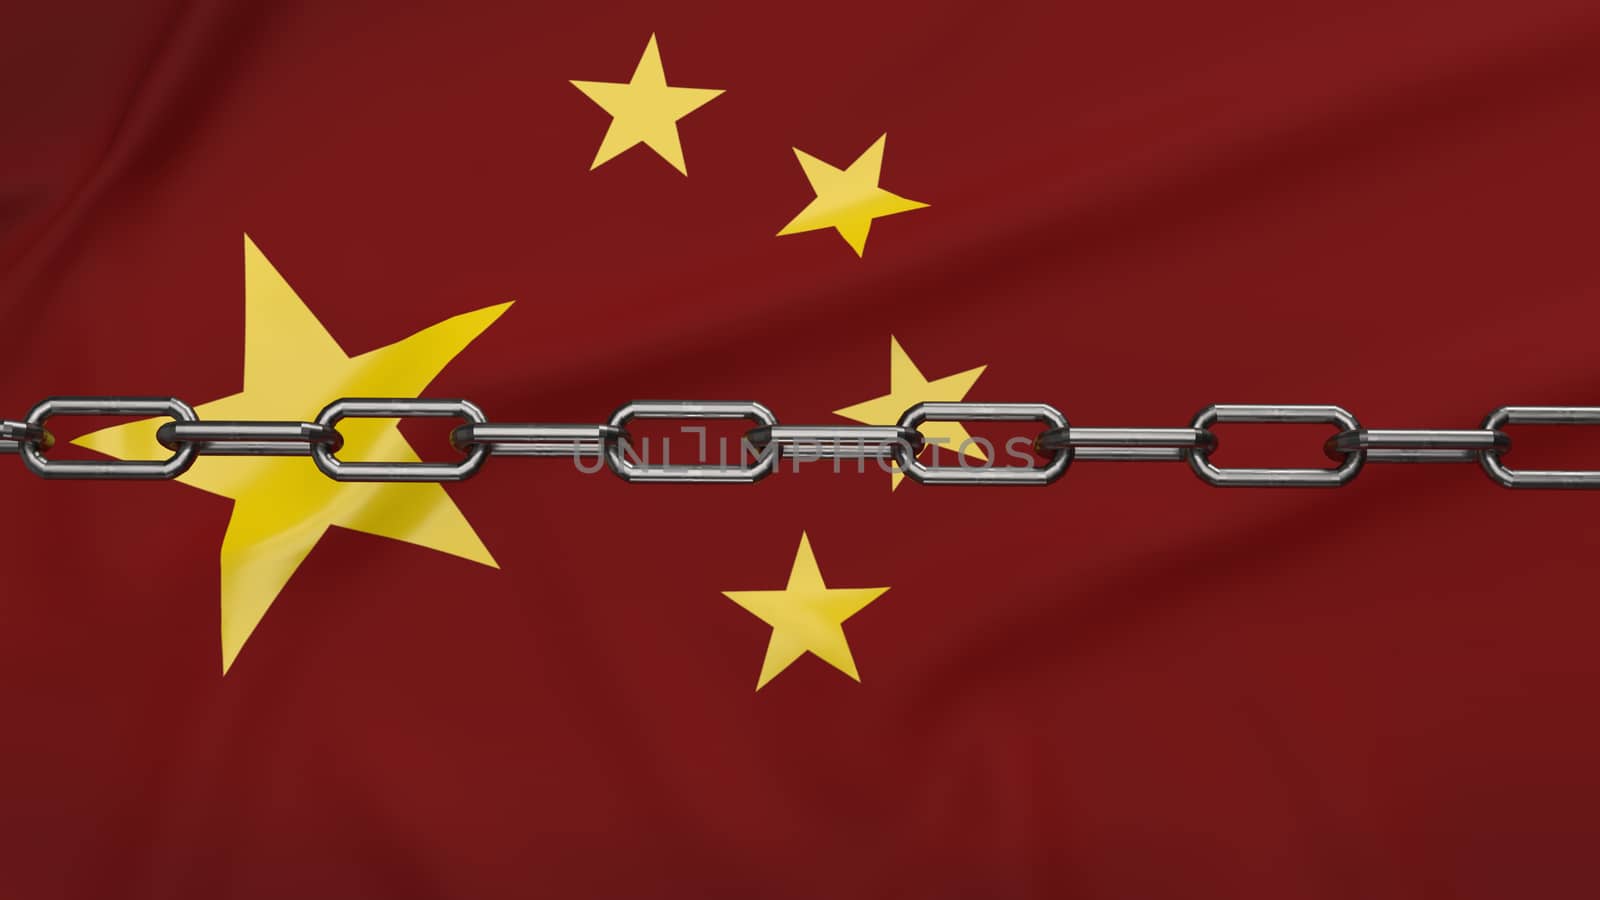 china flag and chain for business content 3d rendering.
 by Niphon_13